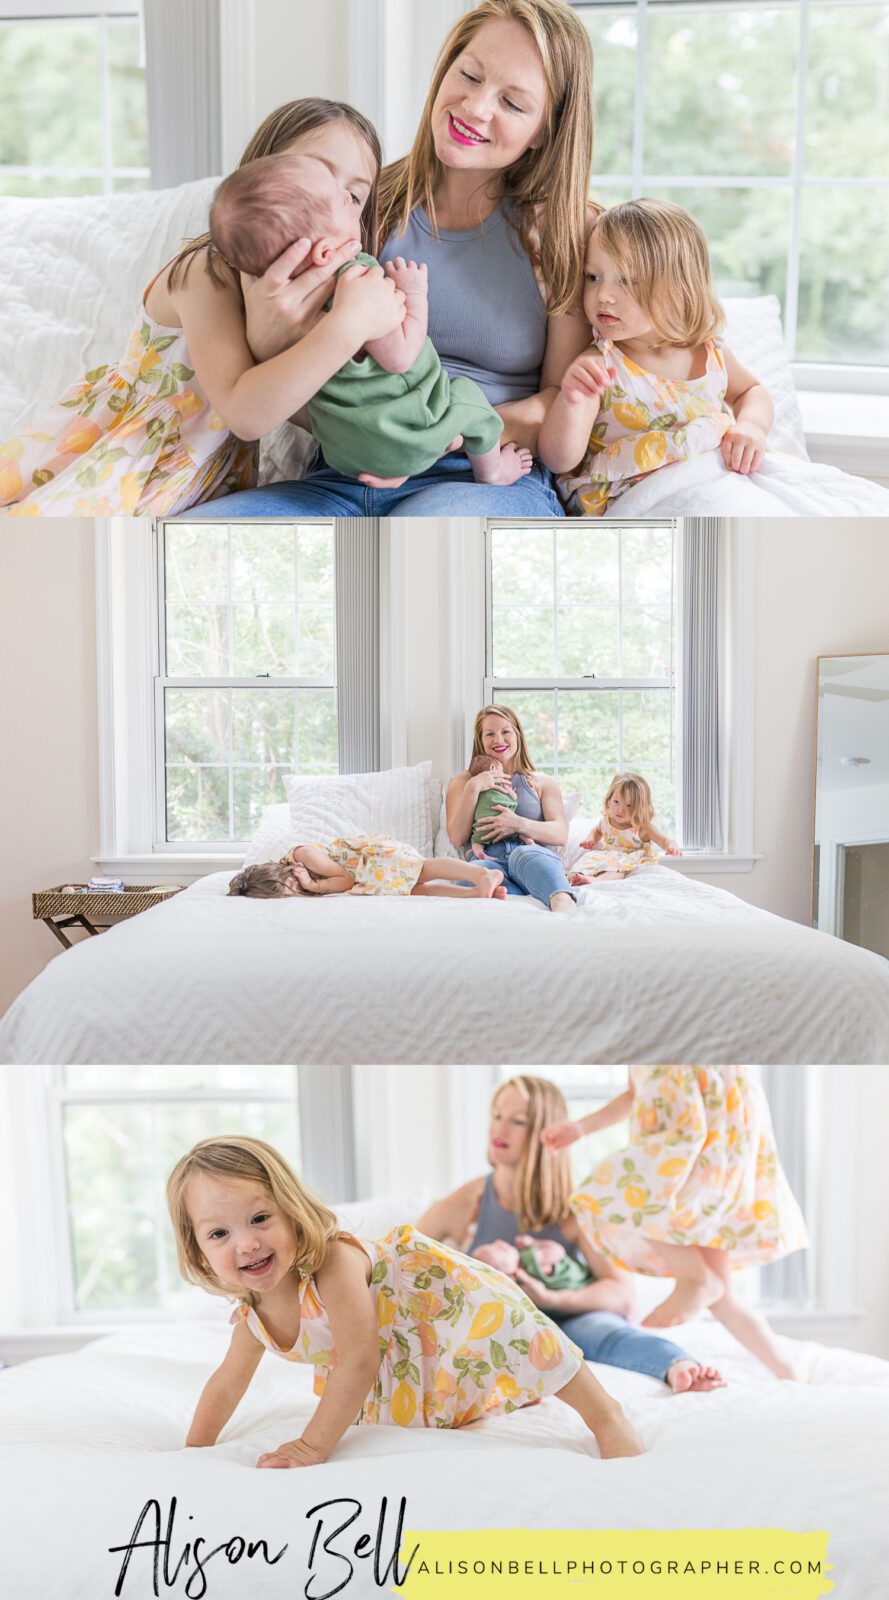 Lifestyle Hawaii Newborn Photography with siblings by alison bell